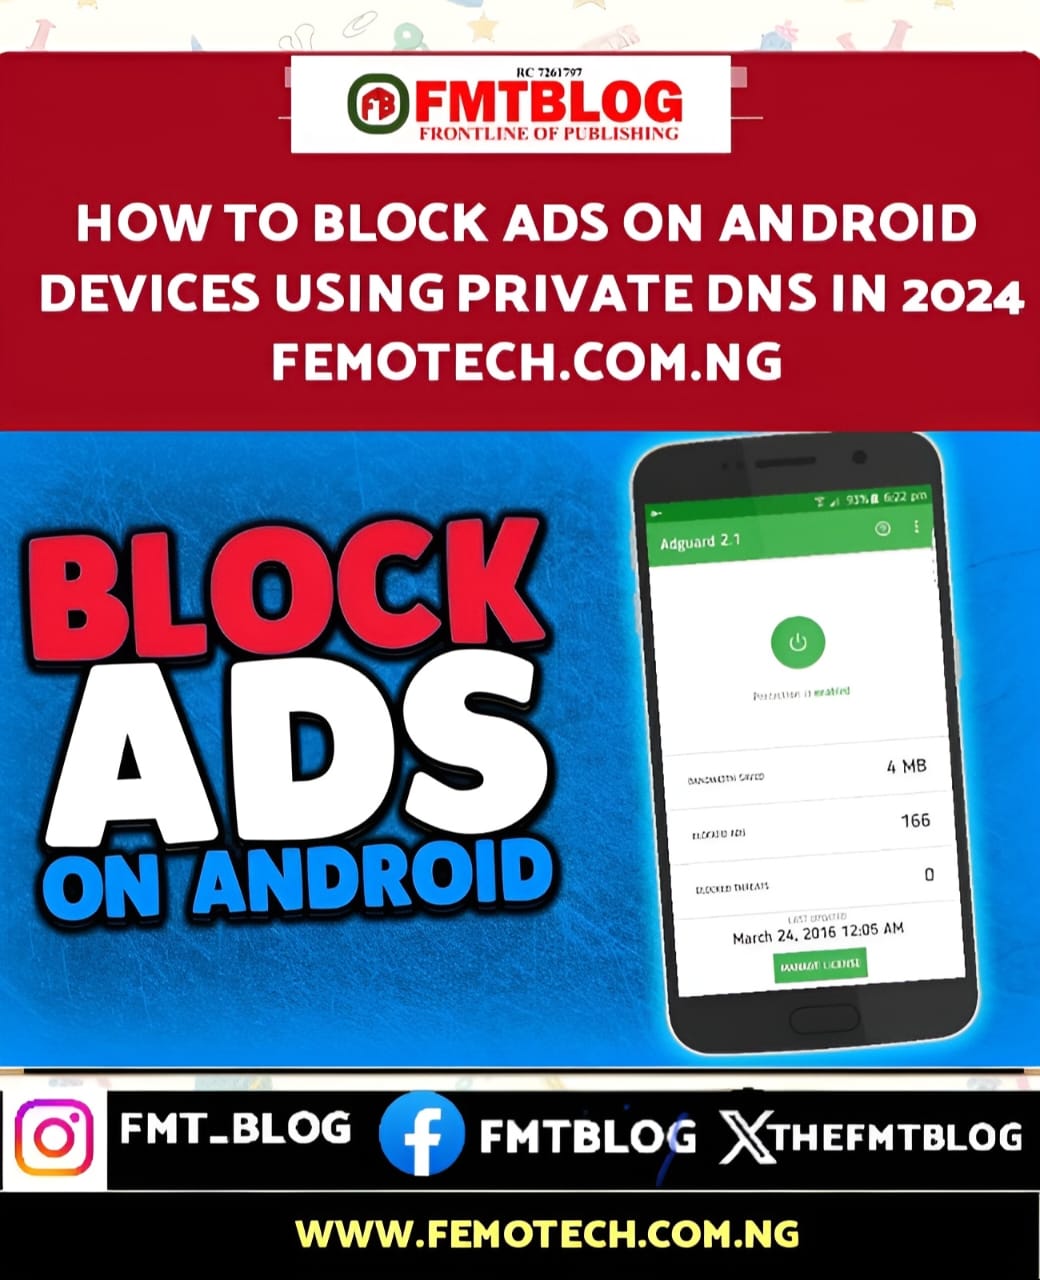 How To Block Ads On Android Devices Using Private DNS in 2024